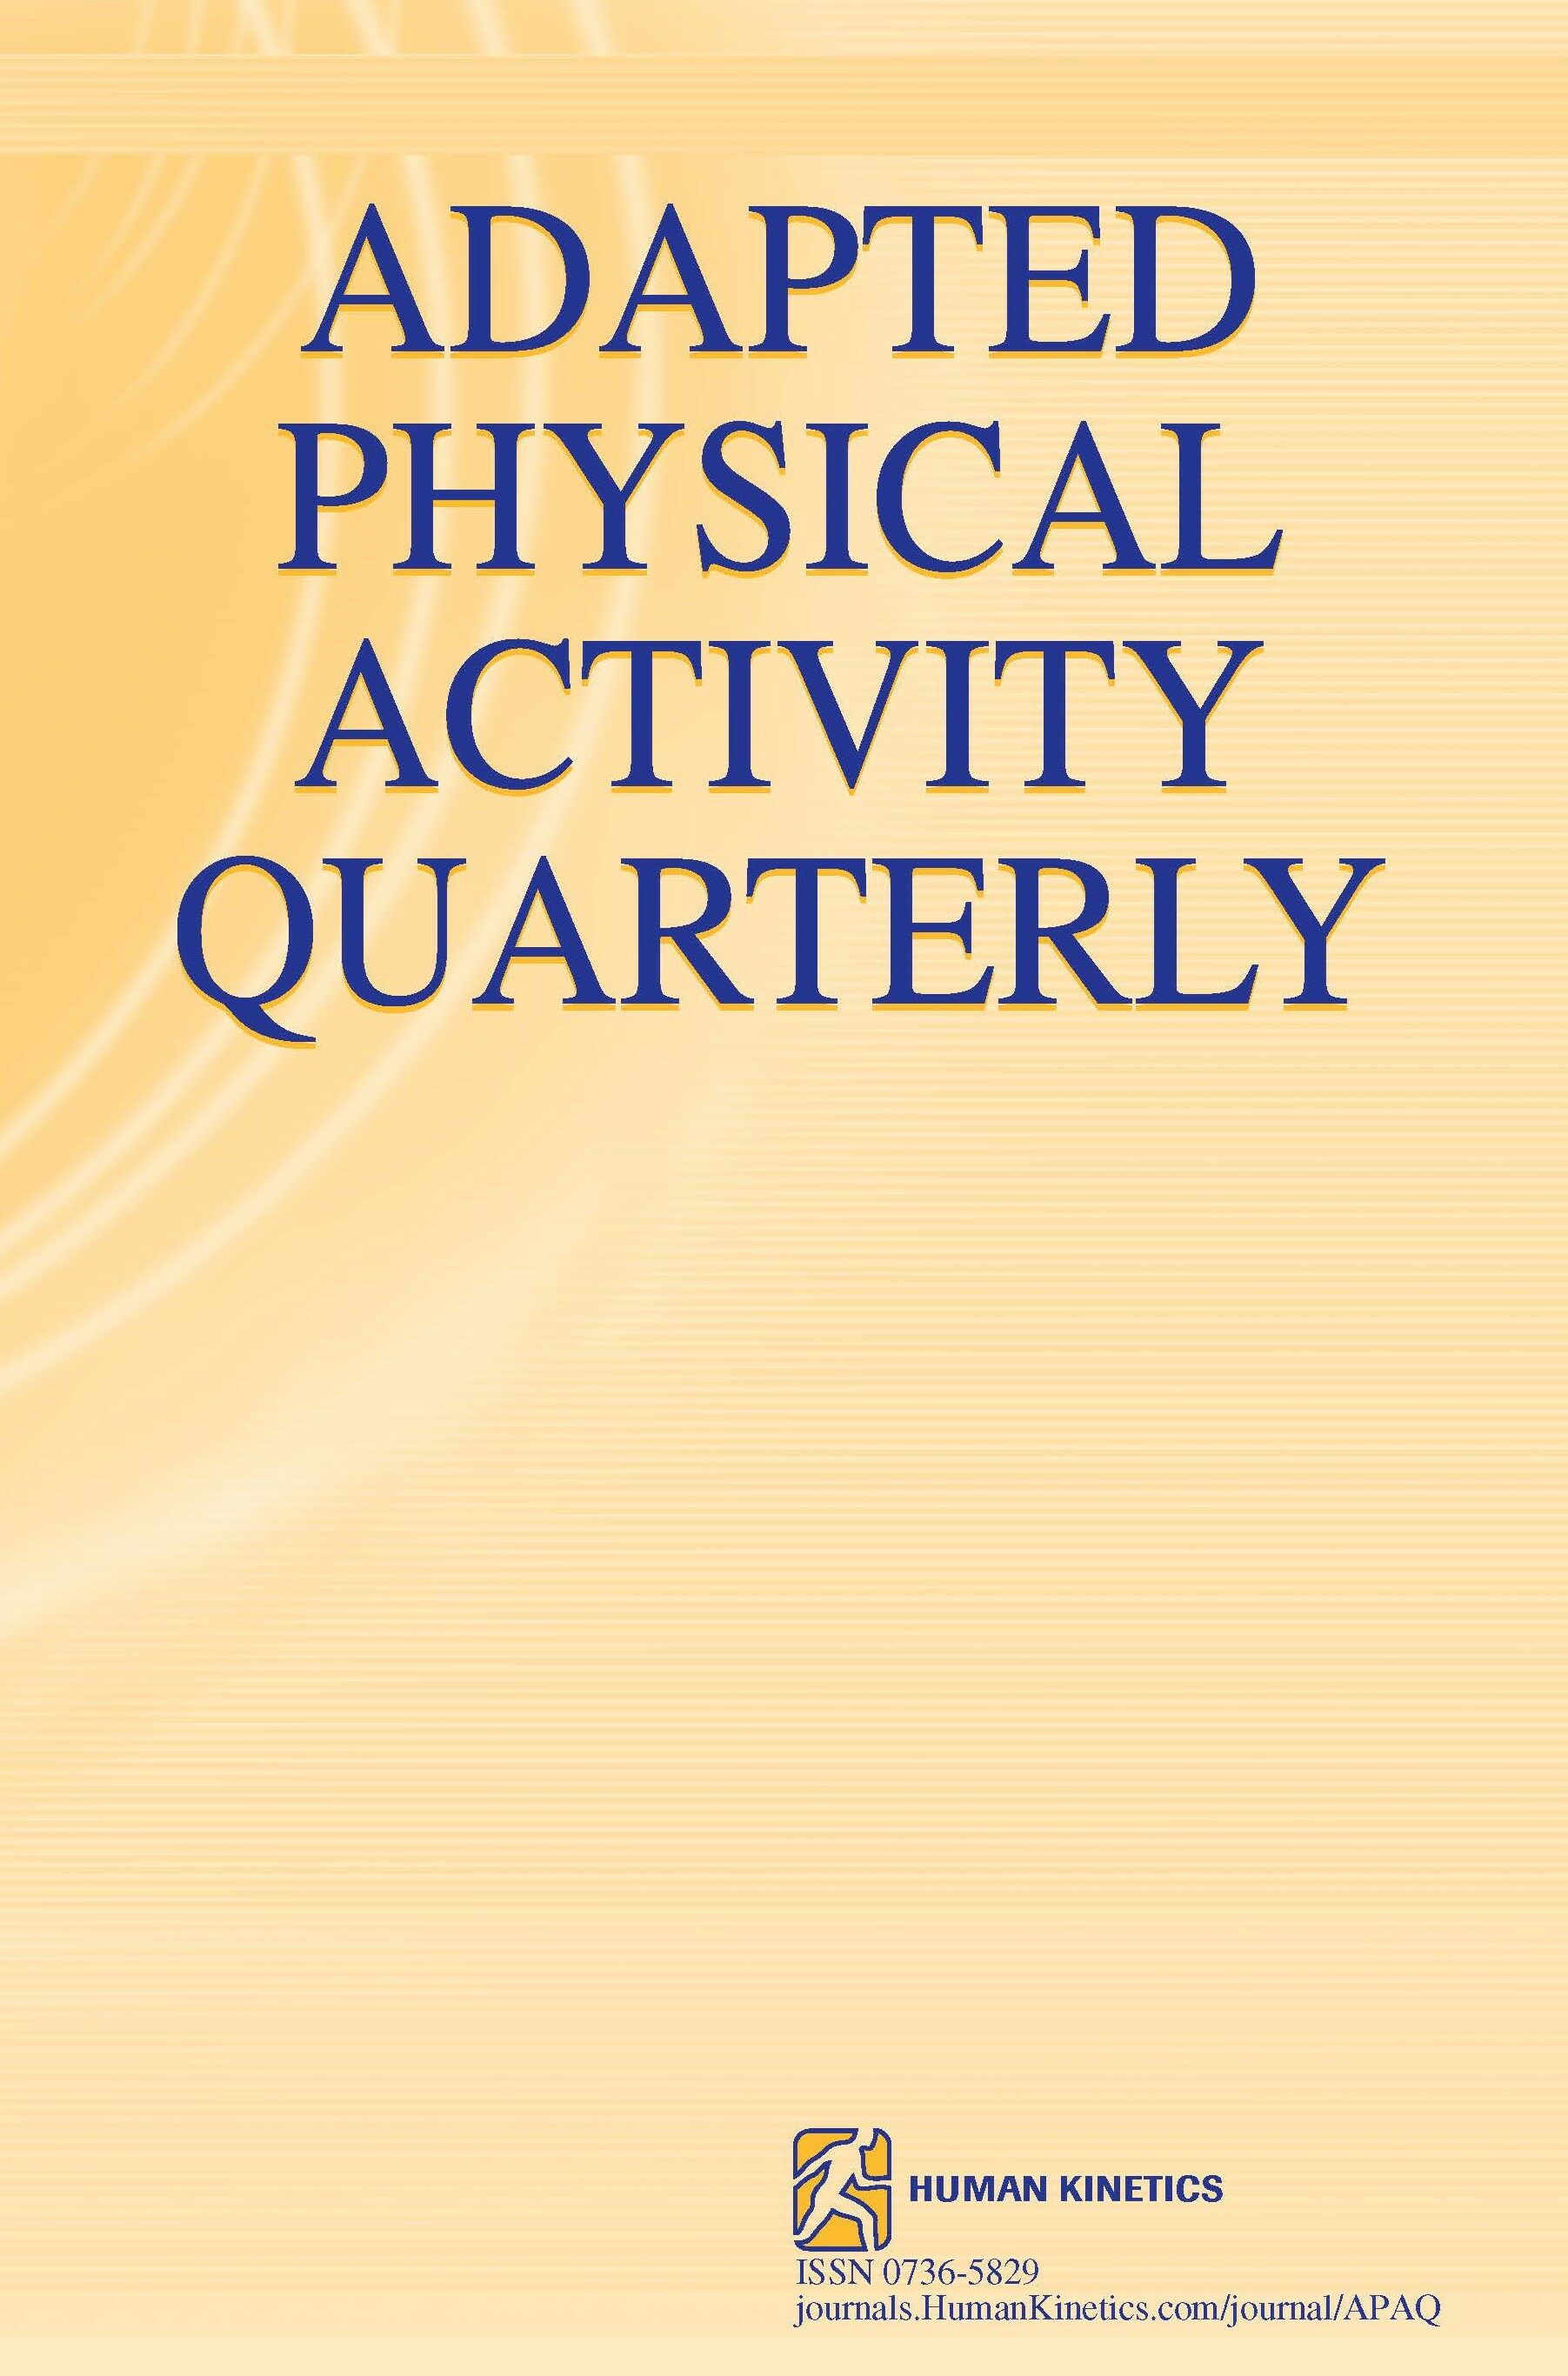 Factors Related to Physical Activity in Adults With Intellectual Disabilities in Group Home Settings: A Systematic Literature Review